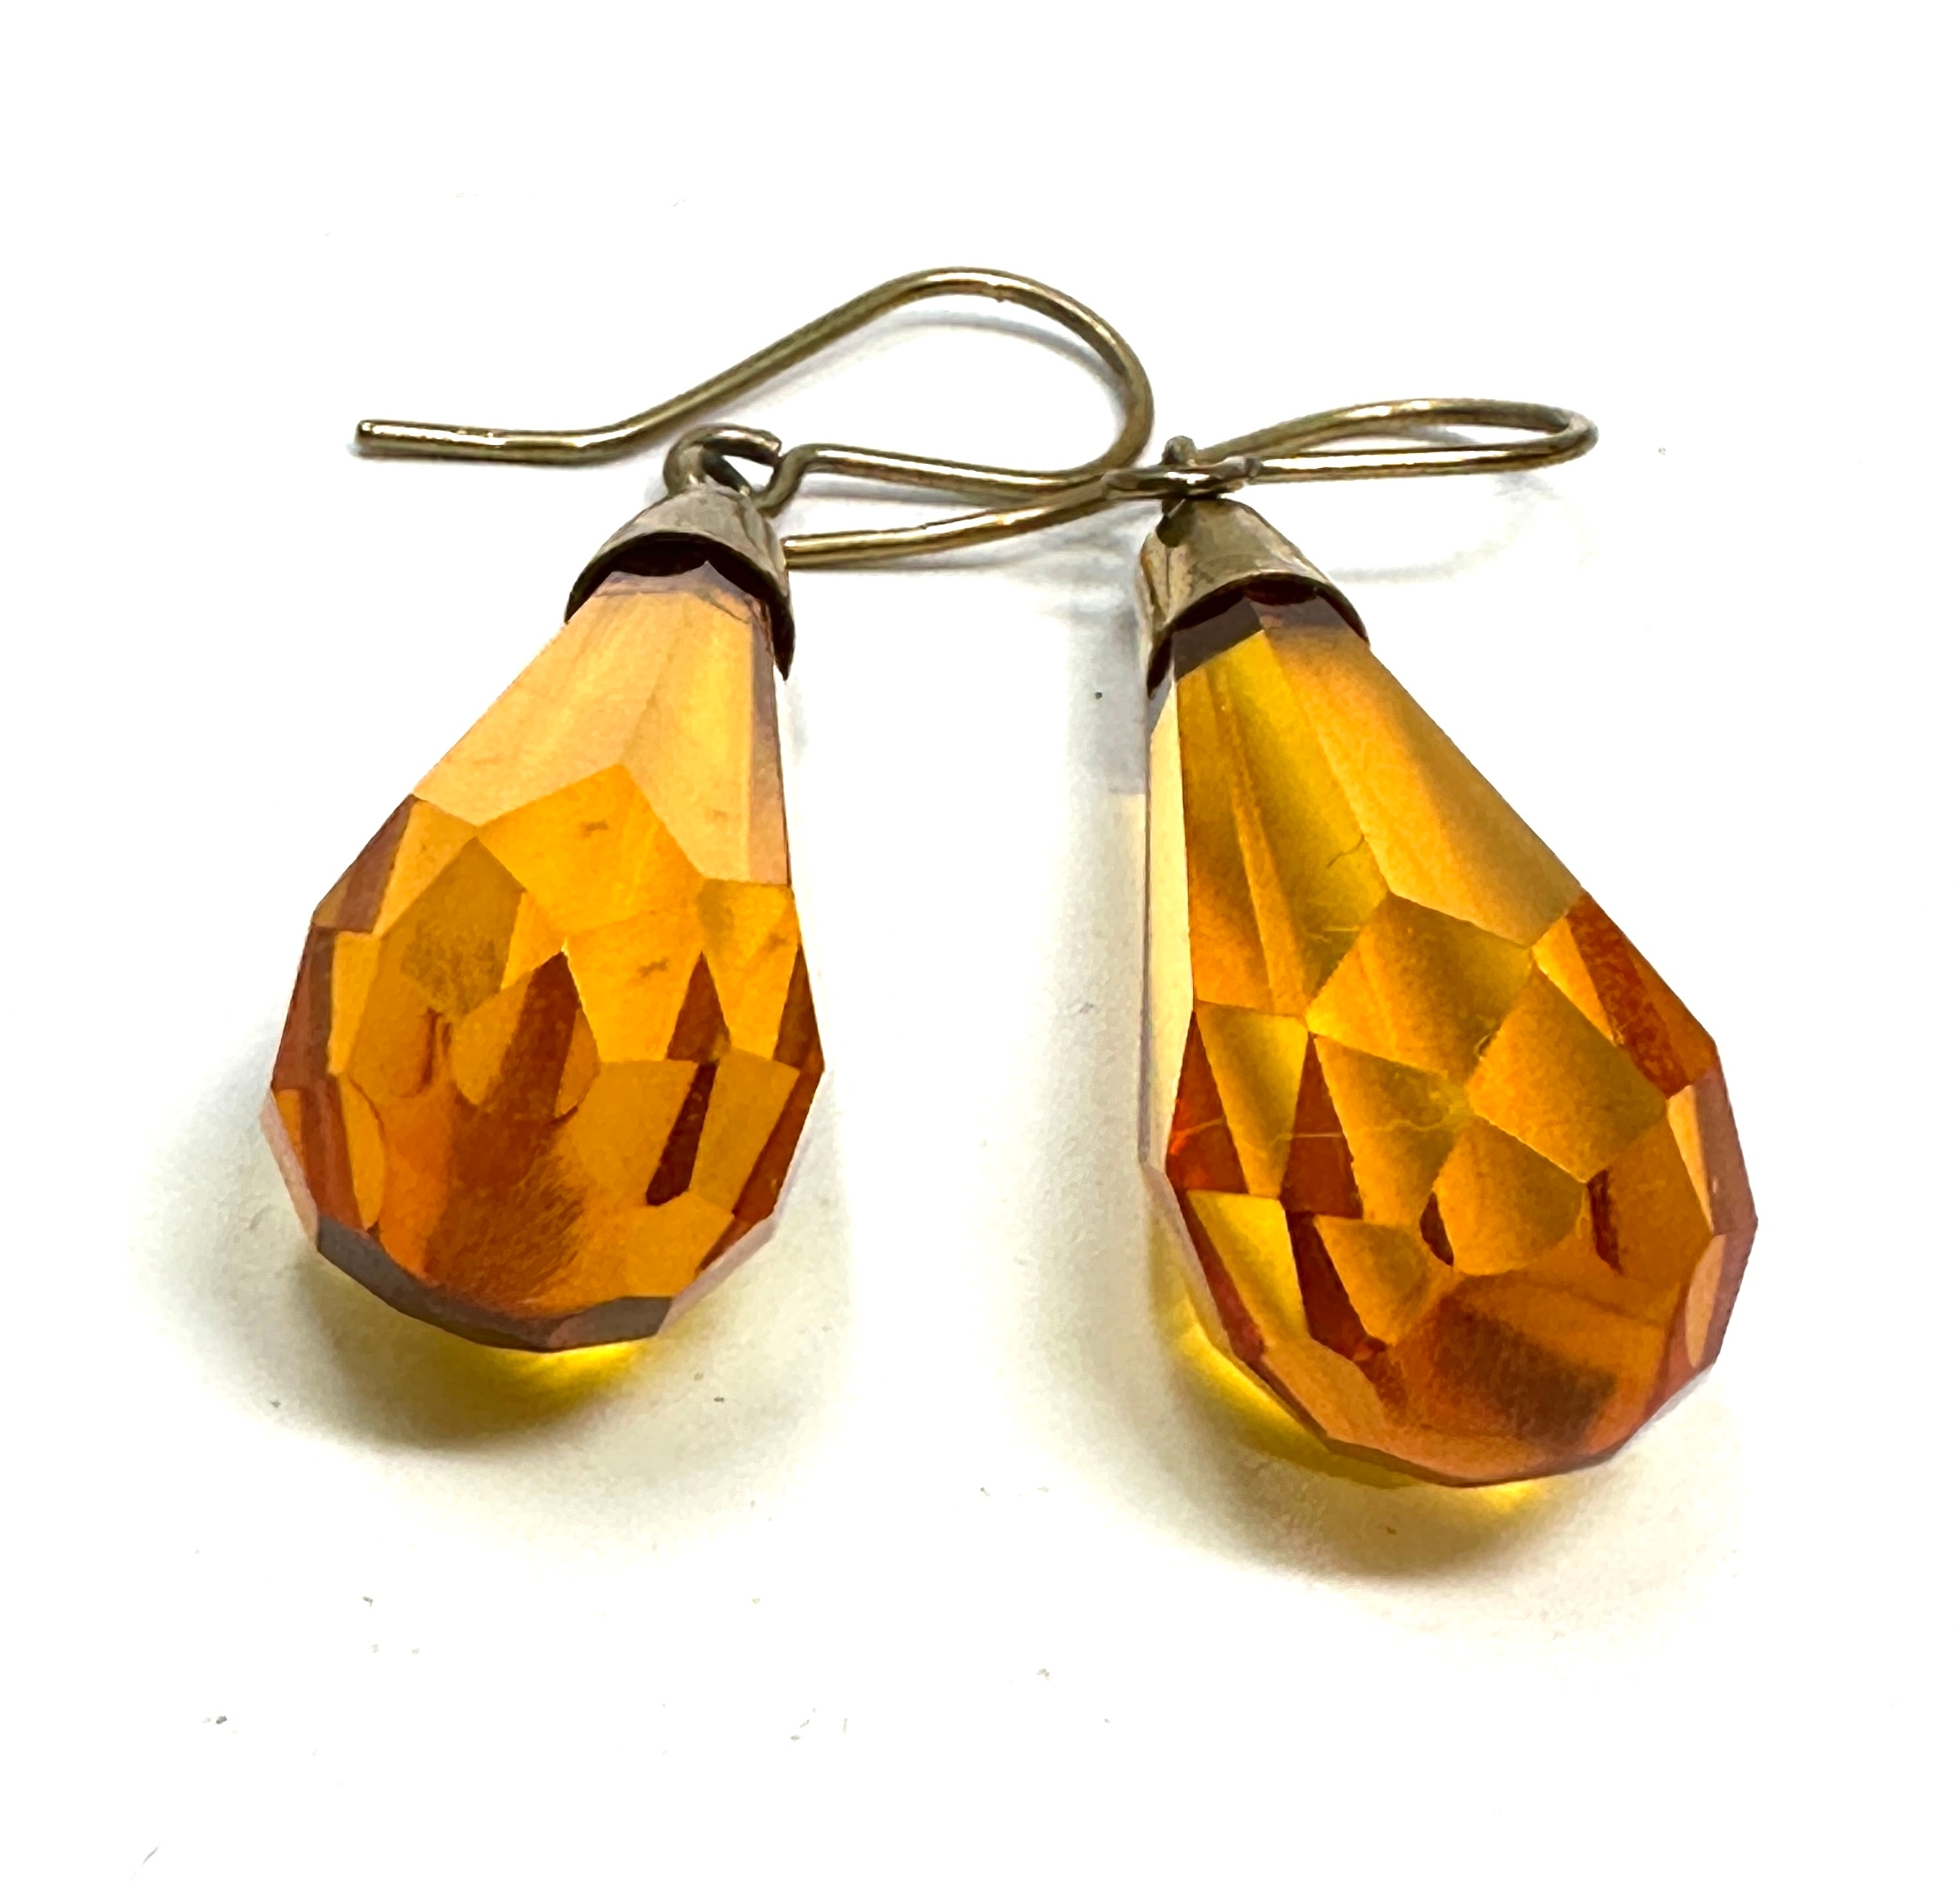 9ct Gold Citrine coloured Teardrop earrings measure approx 3.5cm drop weight. - Image 2 of 3